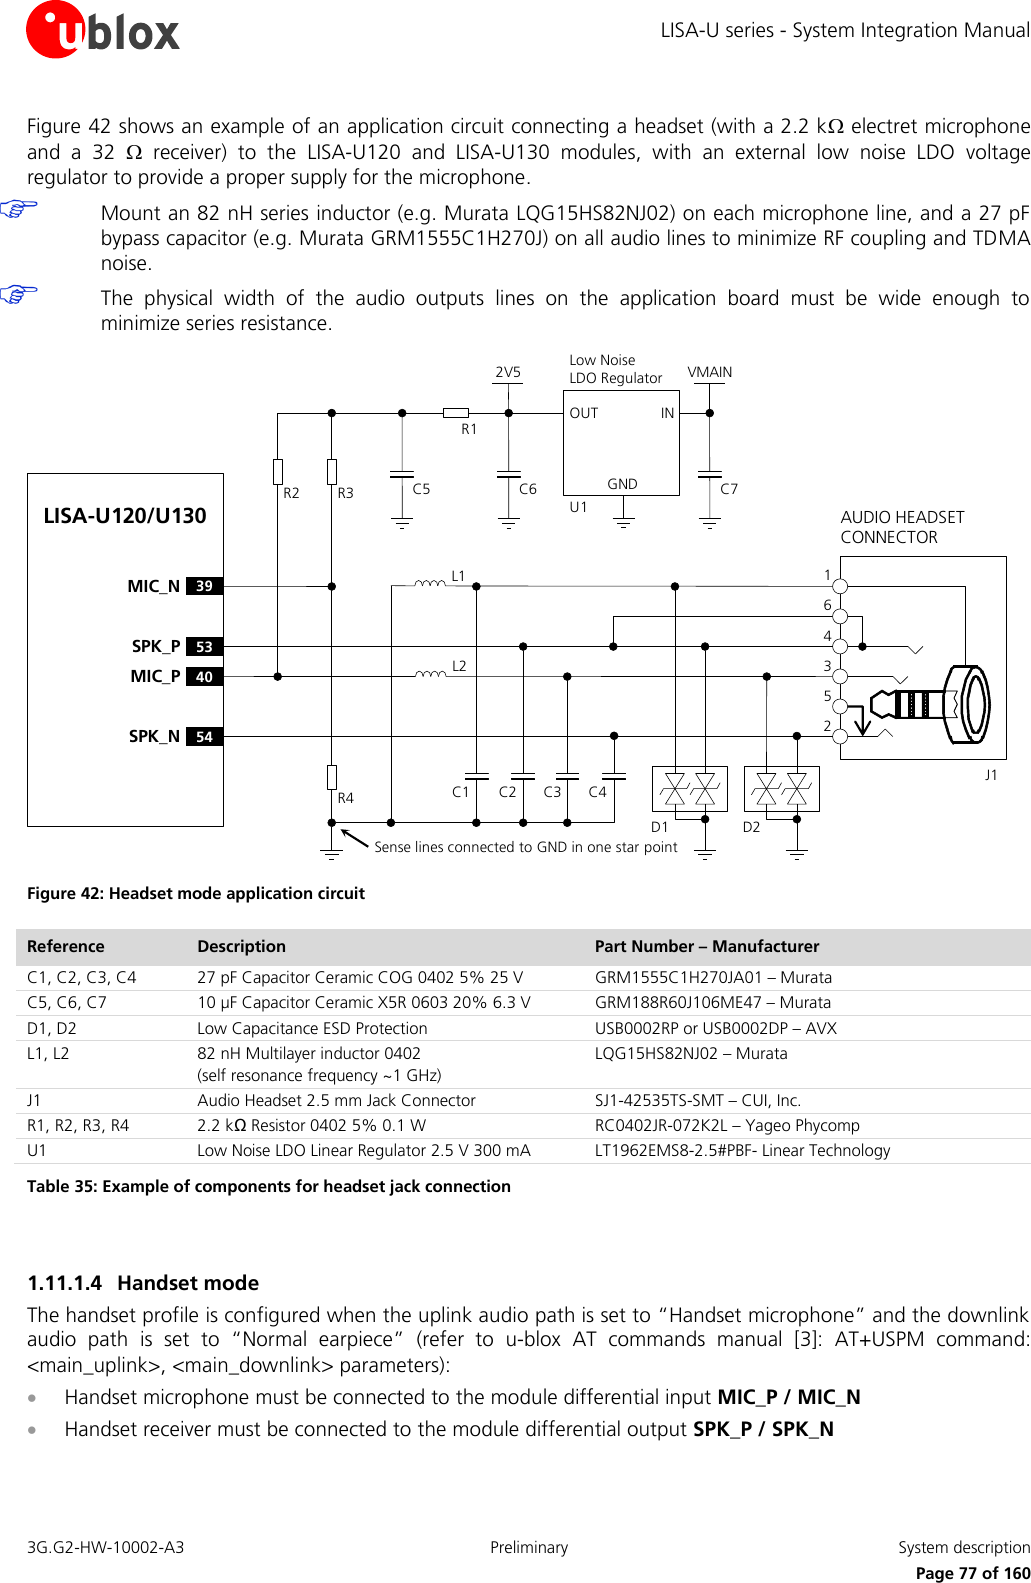 LISA-U series - System Integration Manual 3G.G2-HW-10002-A3  Preliminary  System description      Page 77 of 160 Figure 42 shows an example of an application circuit connecting a headset (with a 2.2 k electret microphone and  a  32    receiver)  to  the  LISA-U120  and  LISA-U130  modules,  with  an  external  low  noise  LDO  voltage regulator to provide a proper supply for the microphone.  Mount an 82 nH series inductor (e.g. Murata LQG15HS82NJ02) on each microphone line, and a 27 pF bypass capacitor (e.g. Murata GRM1555C1H270J) on all audio lines to minimize RF coupling and TDMA noise.  The  physical  width  of  the  audio  outputs  lines  on  the  application  board  must  be  wide  enough  to minimize series resistance. LISA-U120/U130C2 C3 C4J1253461L254SPK_N53SPK_P39MIC_N40MIC_PD1AUDIO HEADSET CONNECTORD2INOUTGNDLow Noise LDO Regulator VMAINU1R4R1C6R3R2 C52V5Sense lines connected to GND in one star pointL1C1C7 Figure 42: Headset mode application circuit Reference Description Part Number – Manufacturer C1, C2, C3, C4 27 pF Capacitor Ceramic COG 0402 5% 25 V  GRM1555C1H270JA01 – Murata C5, C6, C7 10 µF Capacitor Ceramic X5R 0603 20% 6.3 V GRM188R60J106ME47 – Murata D1, D2 Low Capacitance ESD Protection USB0002RP or USB0002DP – AVX L1, L2 82 nH Multilayer inductor 0402 (self resonance frequency ~1 GHz) LQG15HS82NJ02 – Murata J1 Audio Headset 2.5 mm Jack Connector SJ1-42535TS-SMT – CUI, Inc. R1, R2, R3, R4 2.2 kΩ Resistor 0402 5% 0.1 W  RC0402JR-072K2L – Yageo Phycomp U1 Low Noise LDO Linear Regulator 2.5 V 300 mA LT1962EMS8-2.5#PBF- Linear Technology Table 35: Example of components for headset jack connection  1.11.1.4 Handset mode The handset profile is configured when the uplink audio path is set to “Handset microphone” and the downlink audio  path  is  set  to  “Normal  earpiece”  (refer  to  u-blox AT  commands  manual [3]:  AT+USPM  command: &lt;main_uplink&gt;, &lt;main_downlink&gt; parameters):  Handset microphone must be connected to the module differential input MIC_P / MIC_N  Handset receiver must be connected to the module differential output SPK_P / SPK_N 